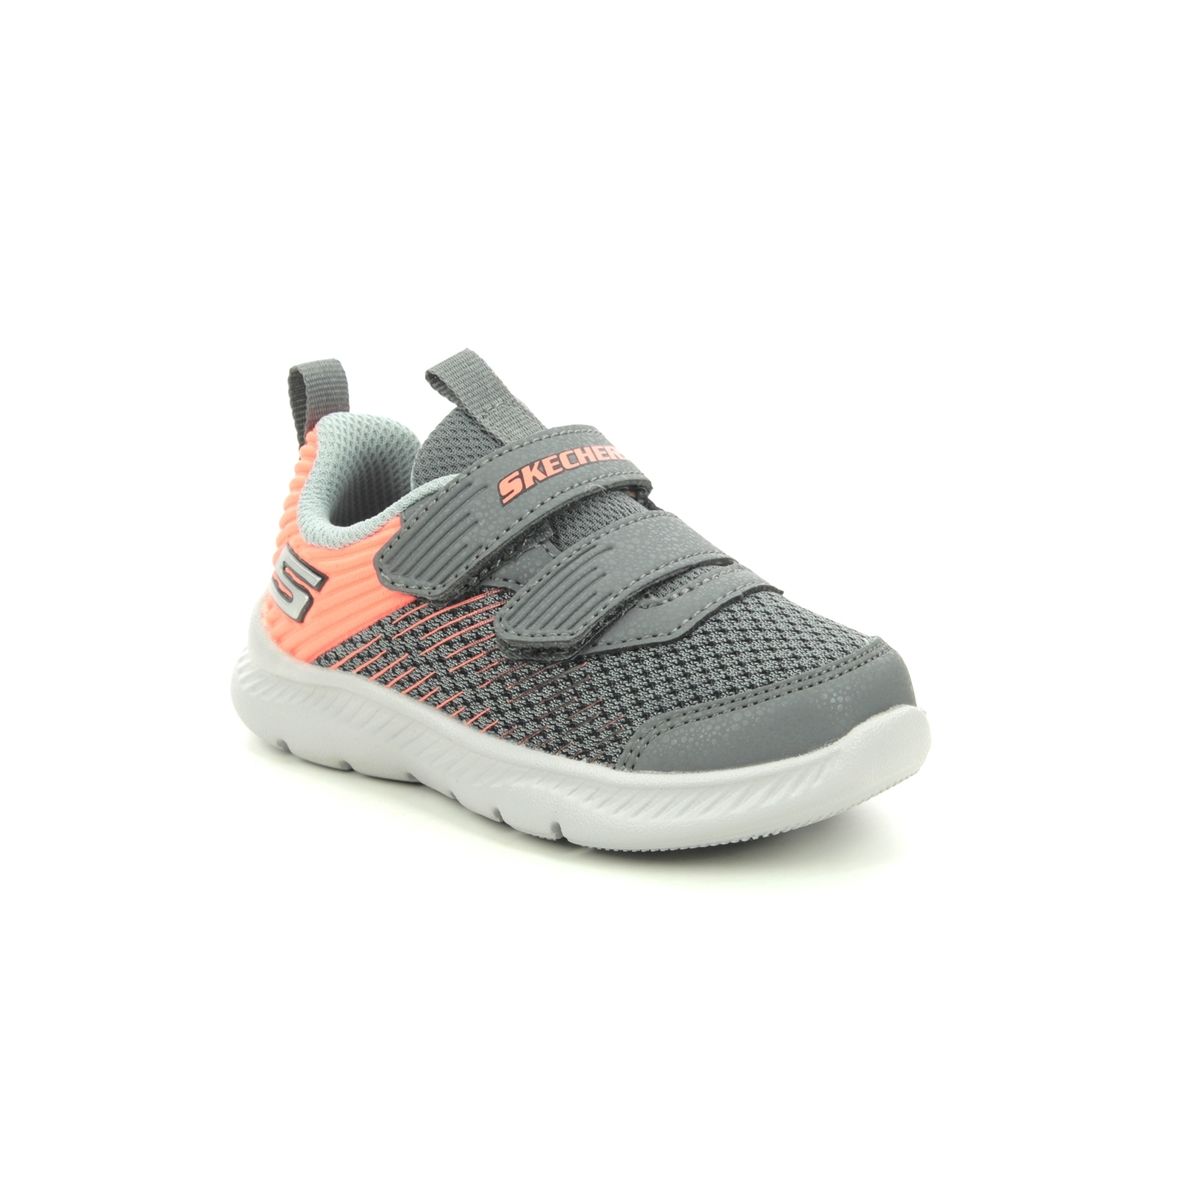 Skechers Comfy Flex 2.0 CCOR Charcoal grey Kids trainers 400044N in a Plain Man-made in Size 21